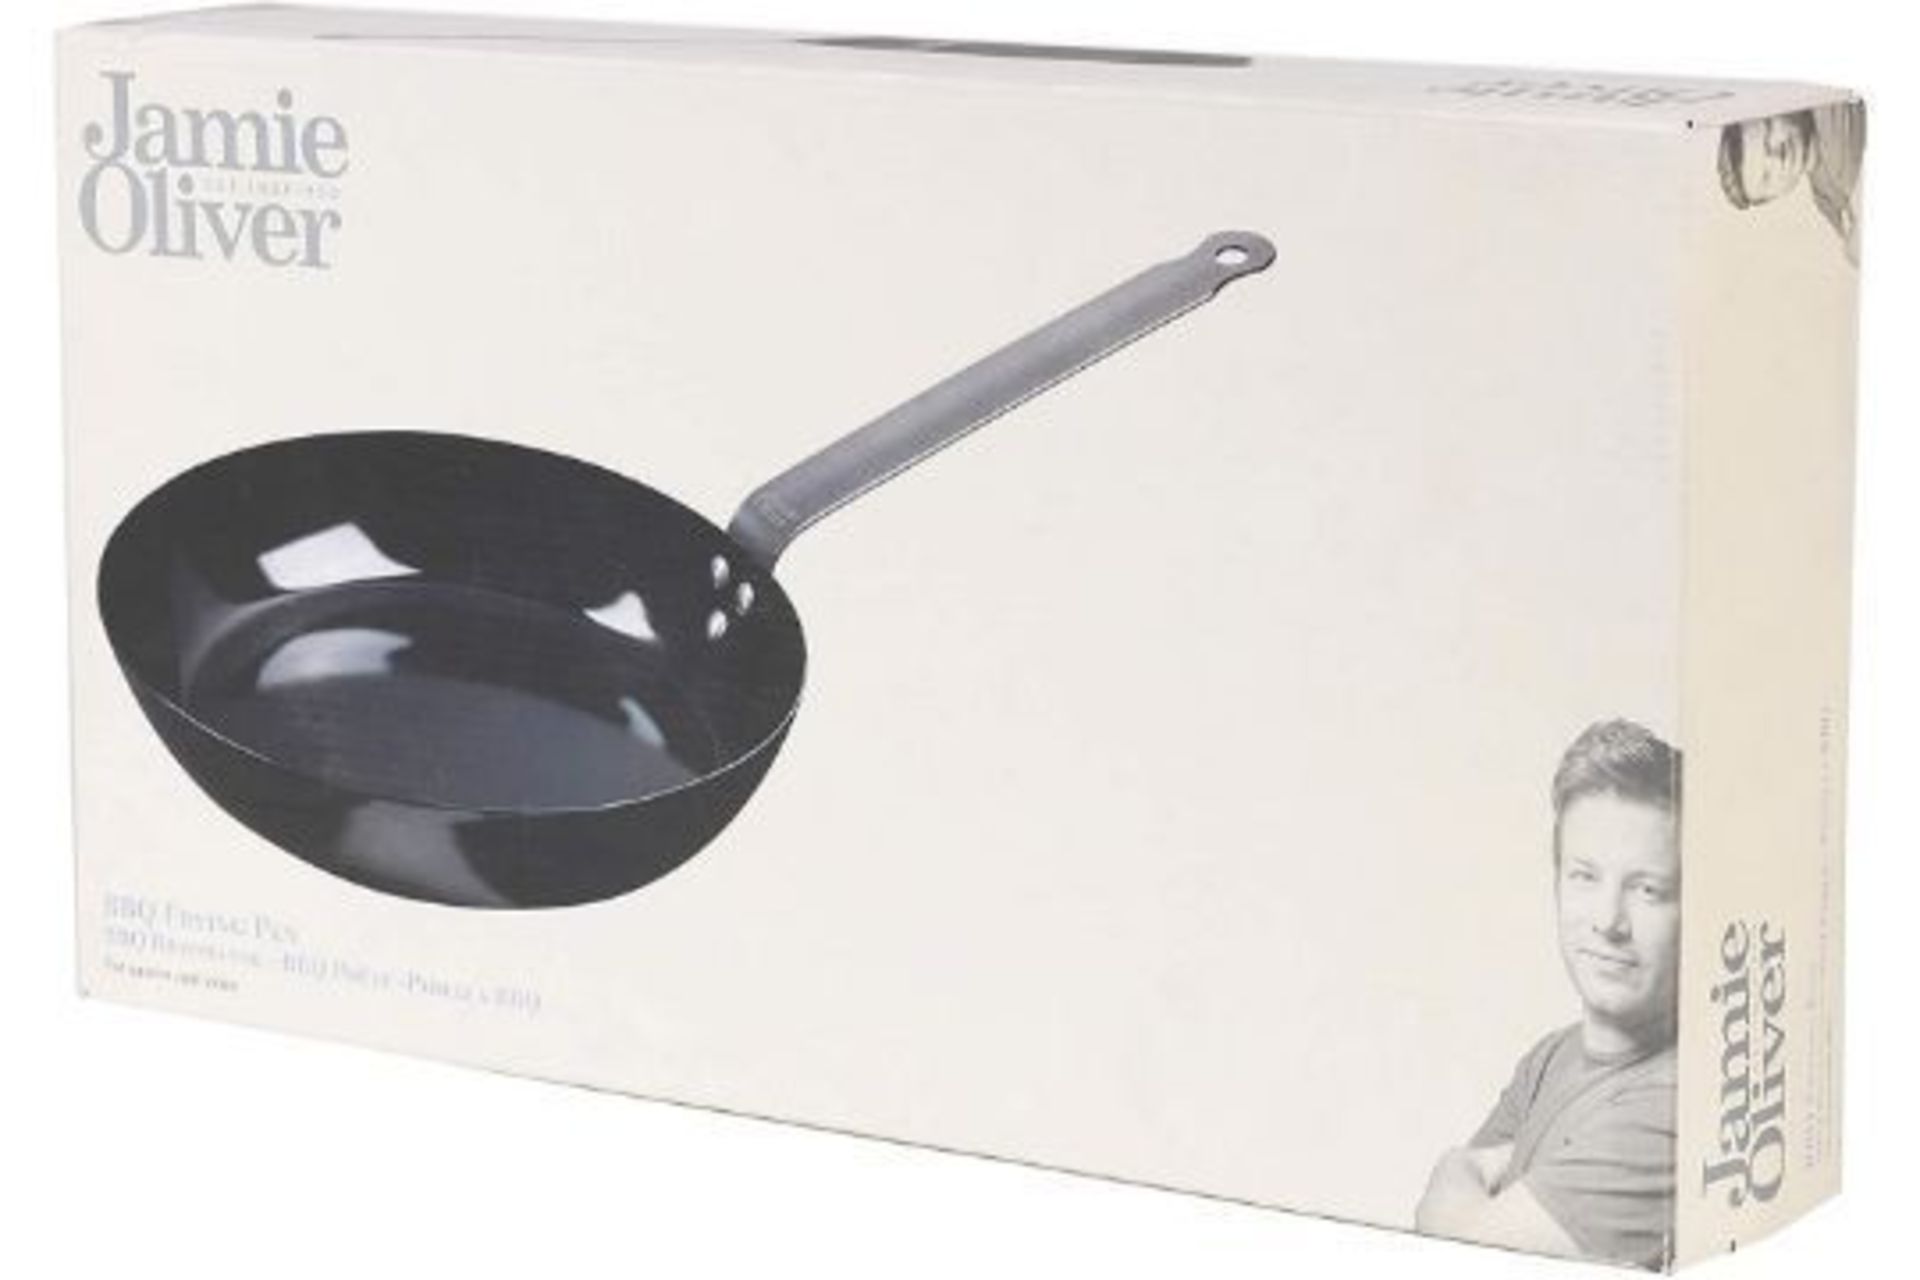 Brand New Jamie Oliver BBQ Frying Pan - RRP £20. - Image 2 of 2